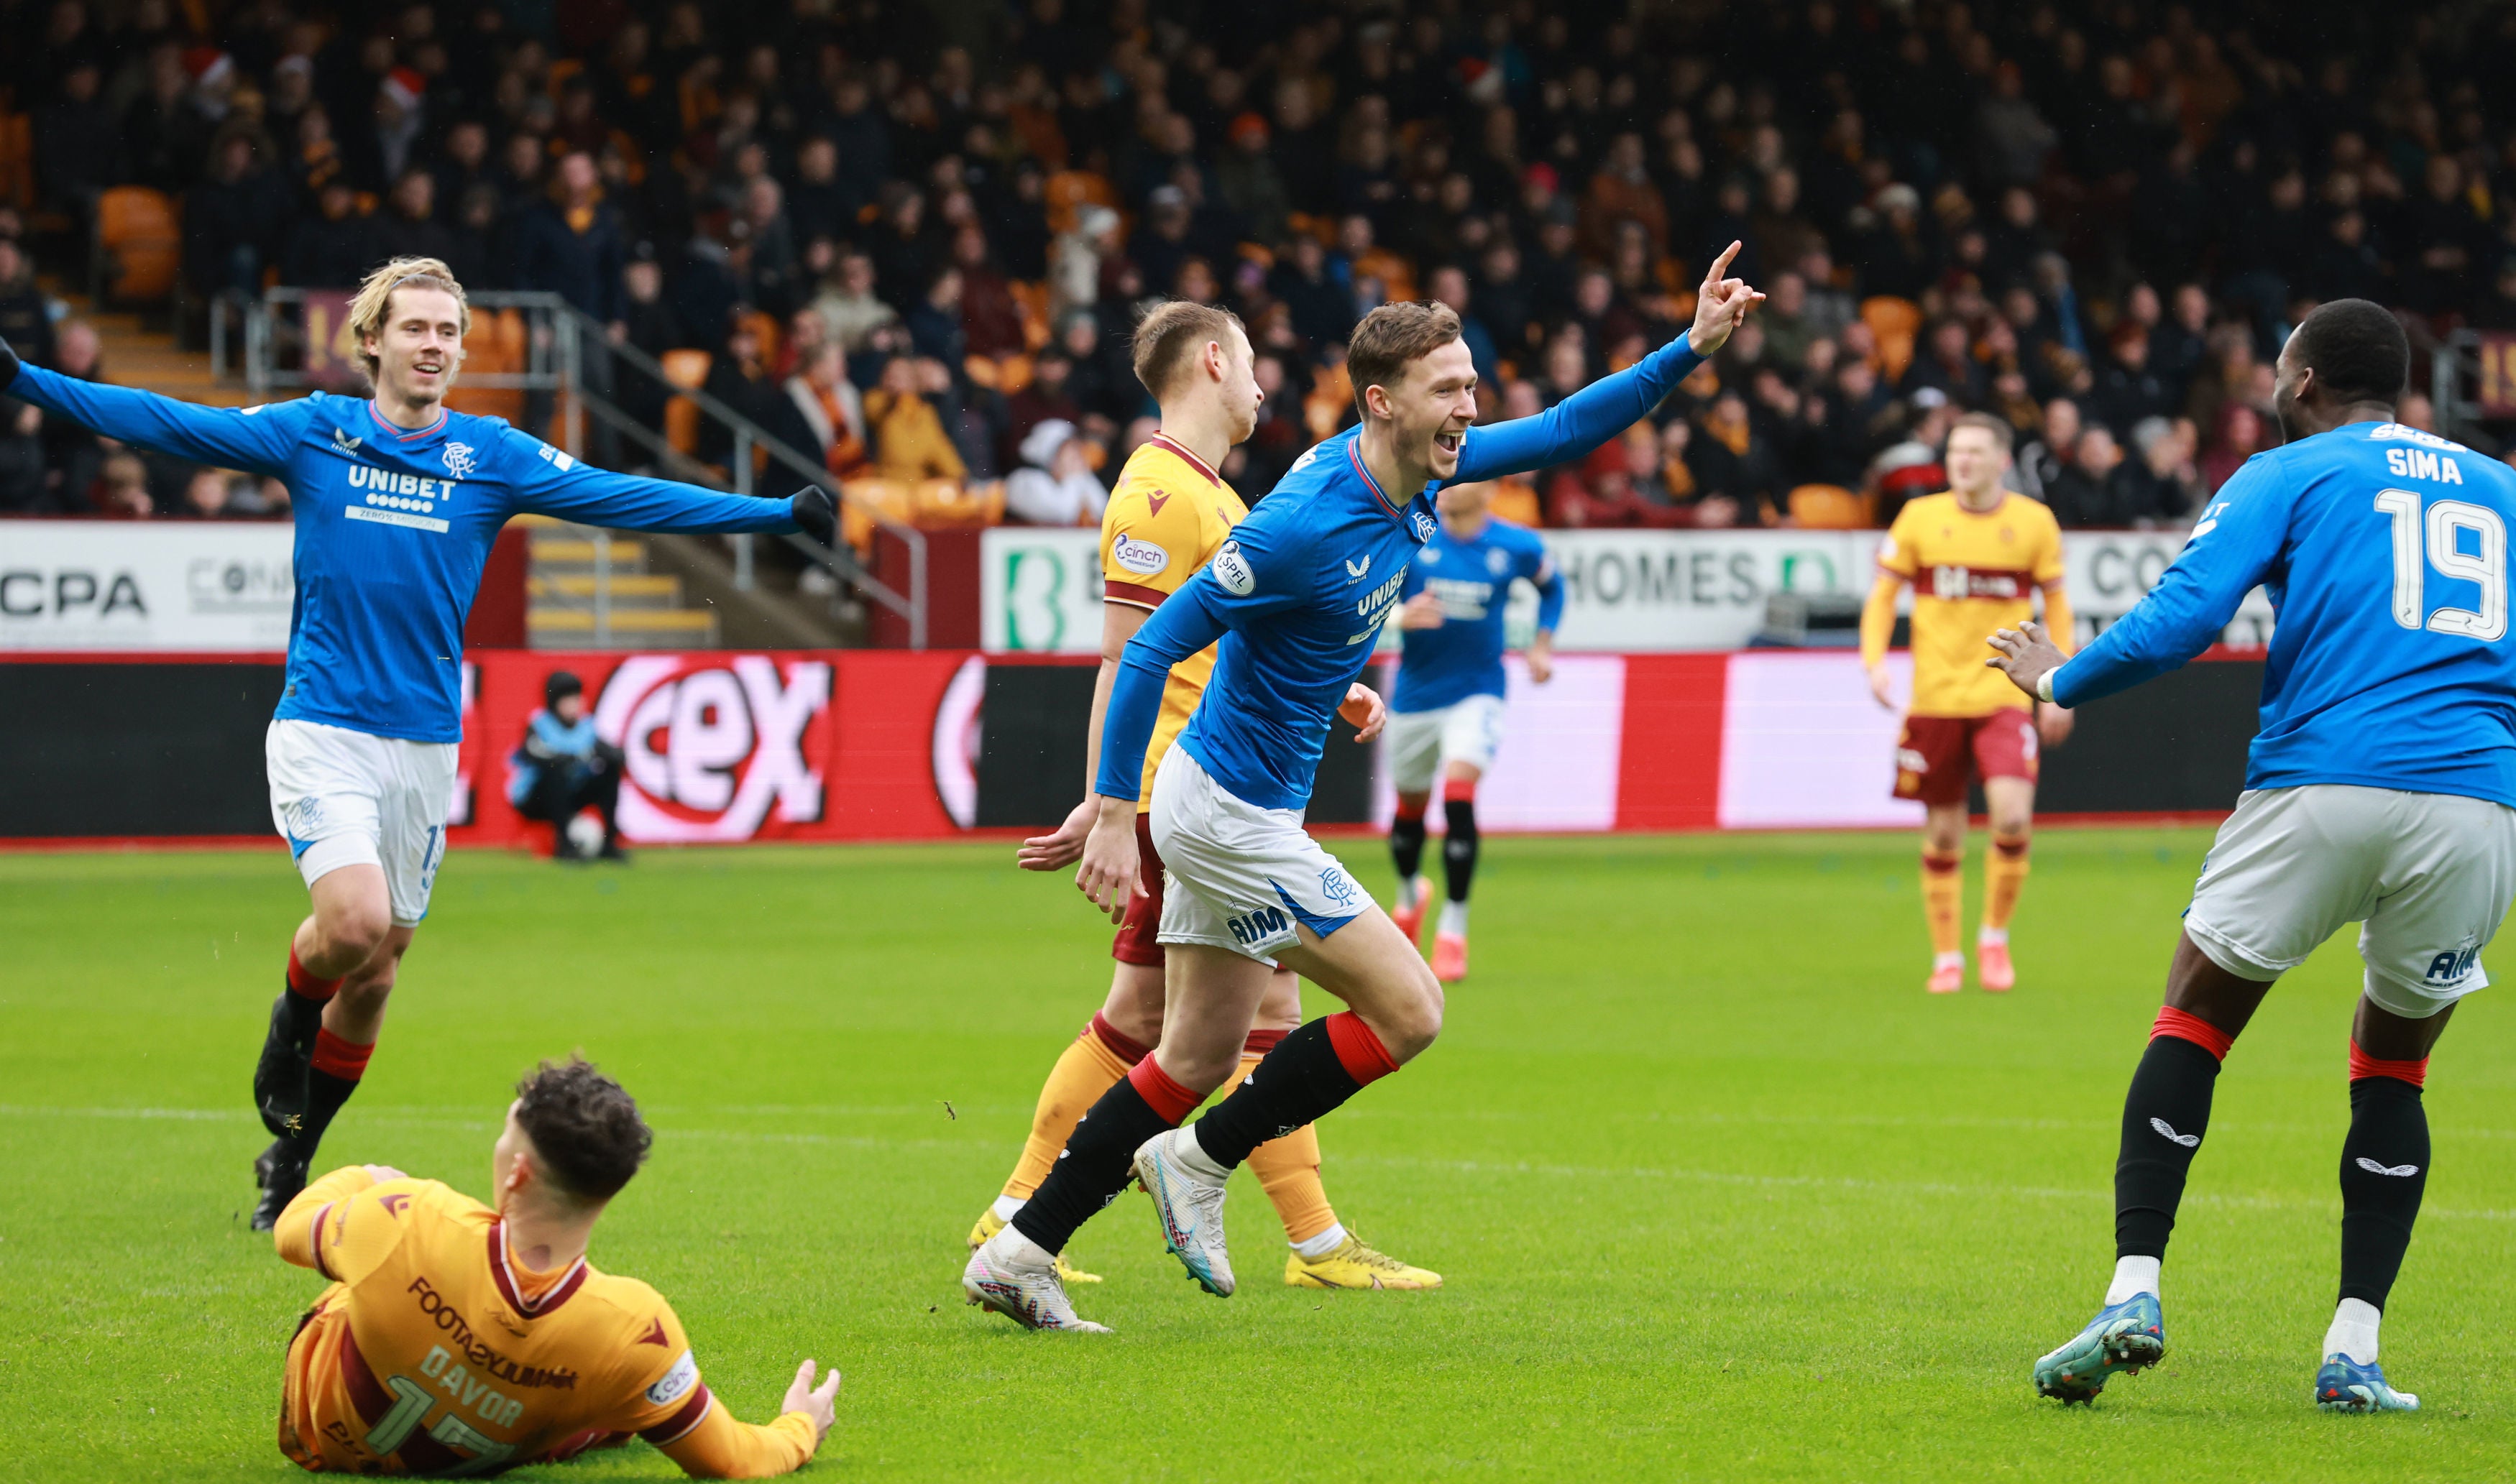 Two early goals were enough for Rangers to down Motherwell